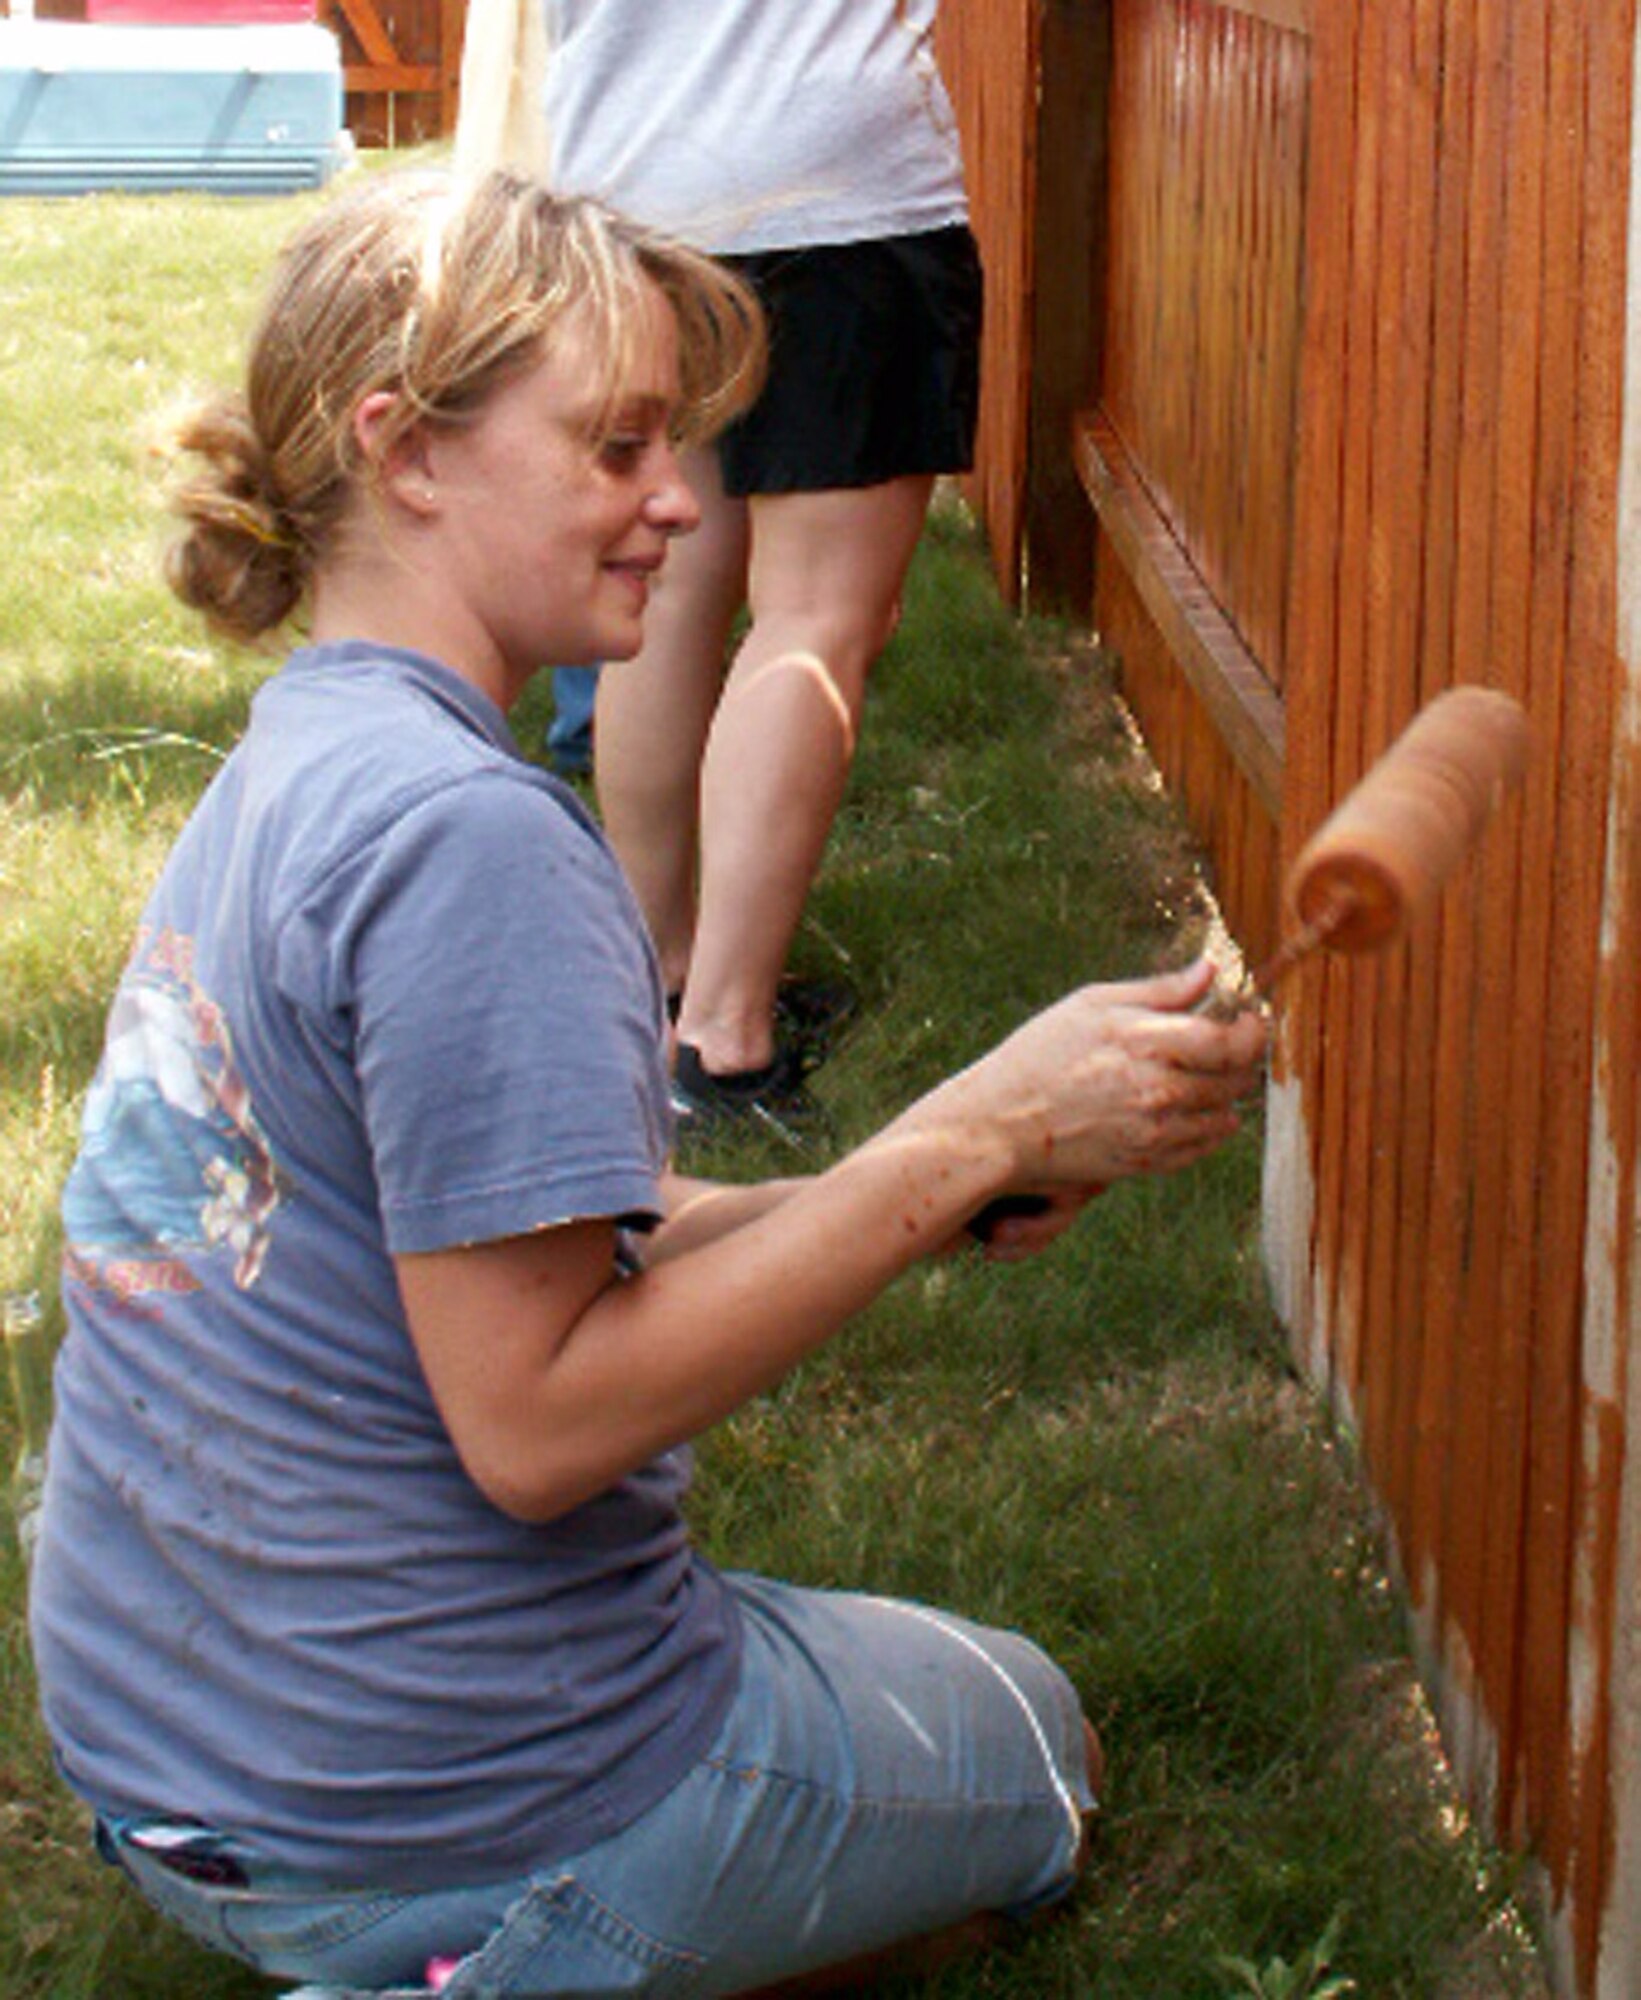 Staff Sgt. Sara Digennaro applies waterproofing to a fence as part of a volunteer effort supporting Operation Homefront April 30 in Cibolo, Texas. Volunteers from the Top 3 Association from Air Force Personnel Center from Randolph Air Force Base, Texas, helped craft a gate to provide better access between the front and back yards for Tech. Sgt. Israel Del Toro, an Airman recovering from wounds sustained during a roadside bombing in Afghanistan. Sergeant Digennaro is a personnelist at AFPC. (U.S. Air Force photo/Master Sgt. Kat Bailey)
